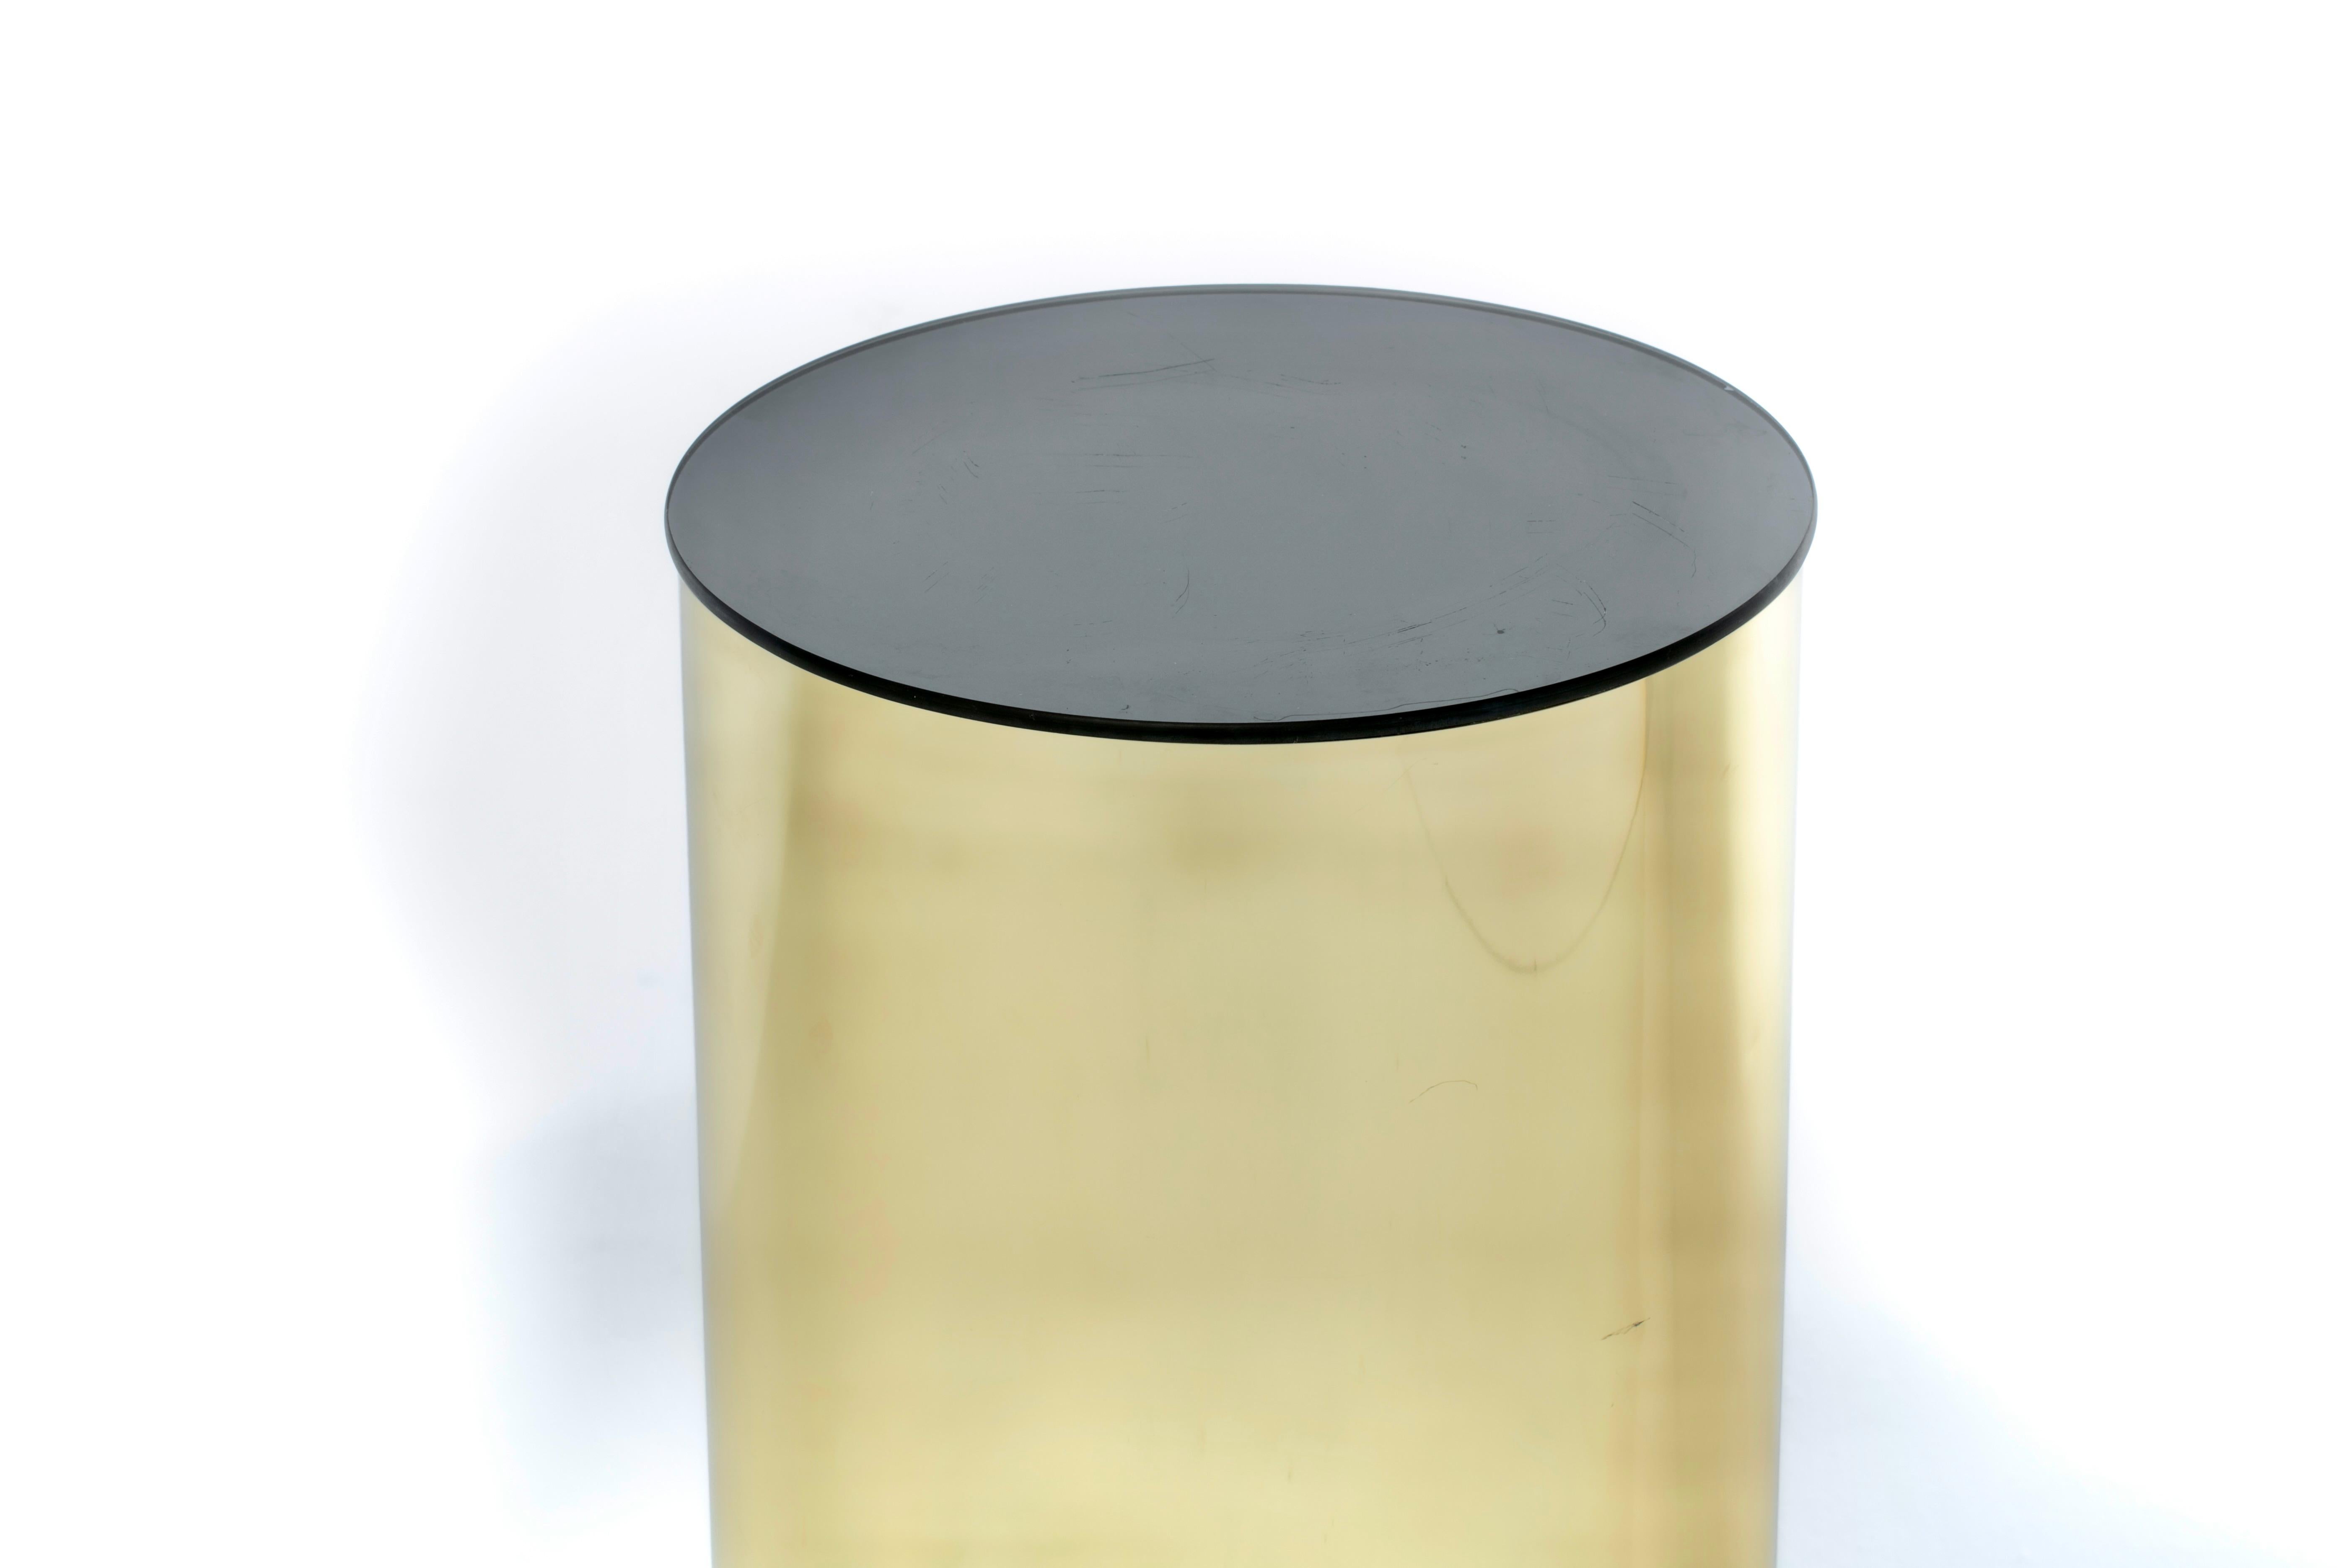 Late 20th Century Post Modern Curtis Jere Circular Pedestal of Brass and Smoked Glass, c. 1984 For Sale